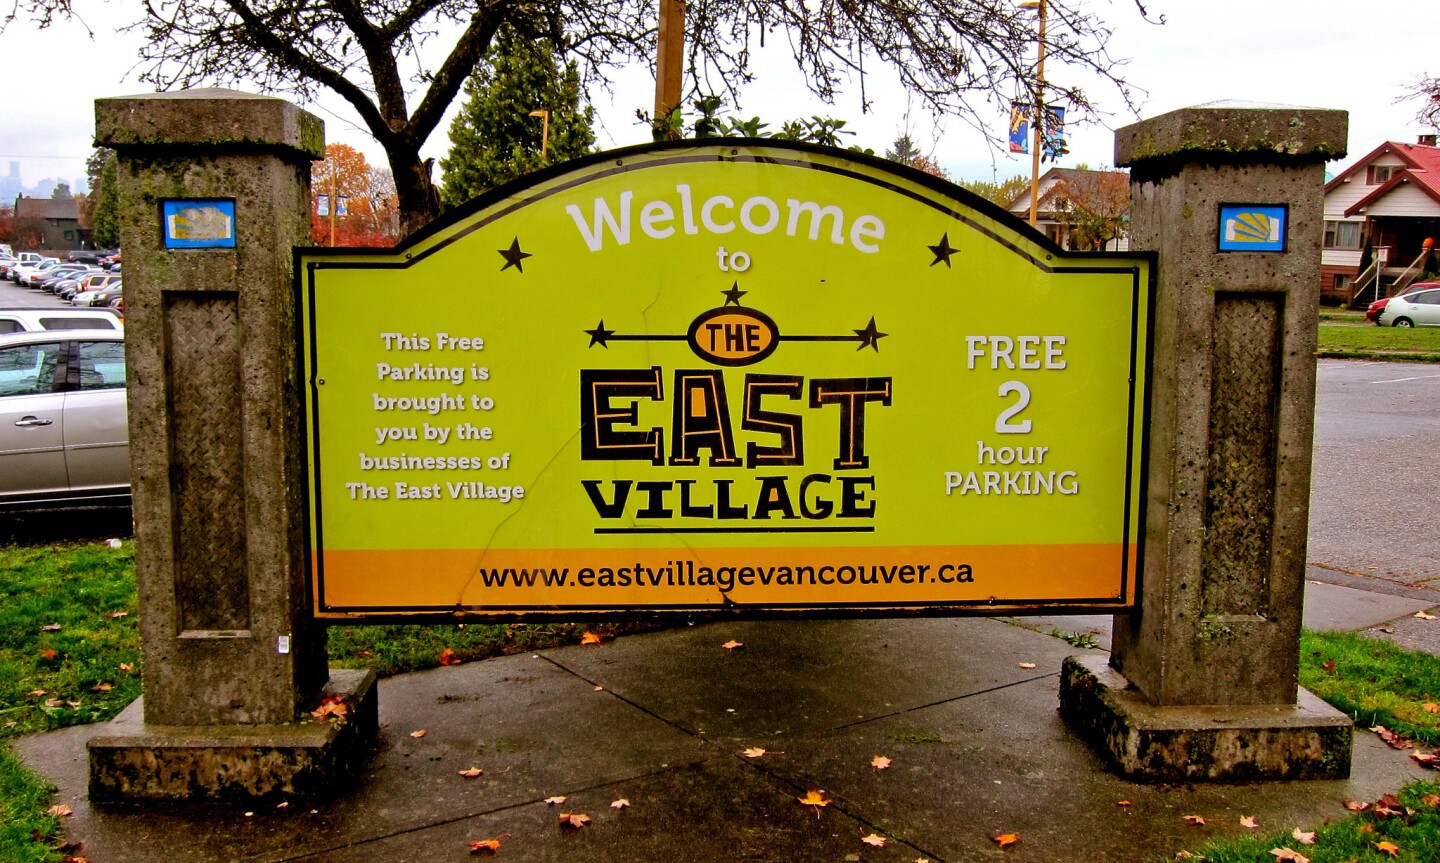 East Village, a rebranded part of East Vancouver's Hastings-Sunrise neighborhood, is home to many craft breweries.